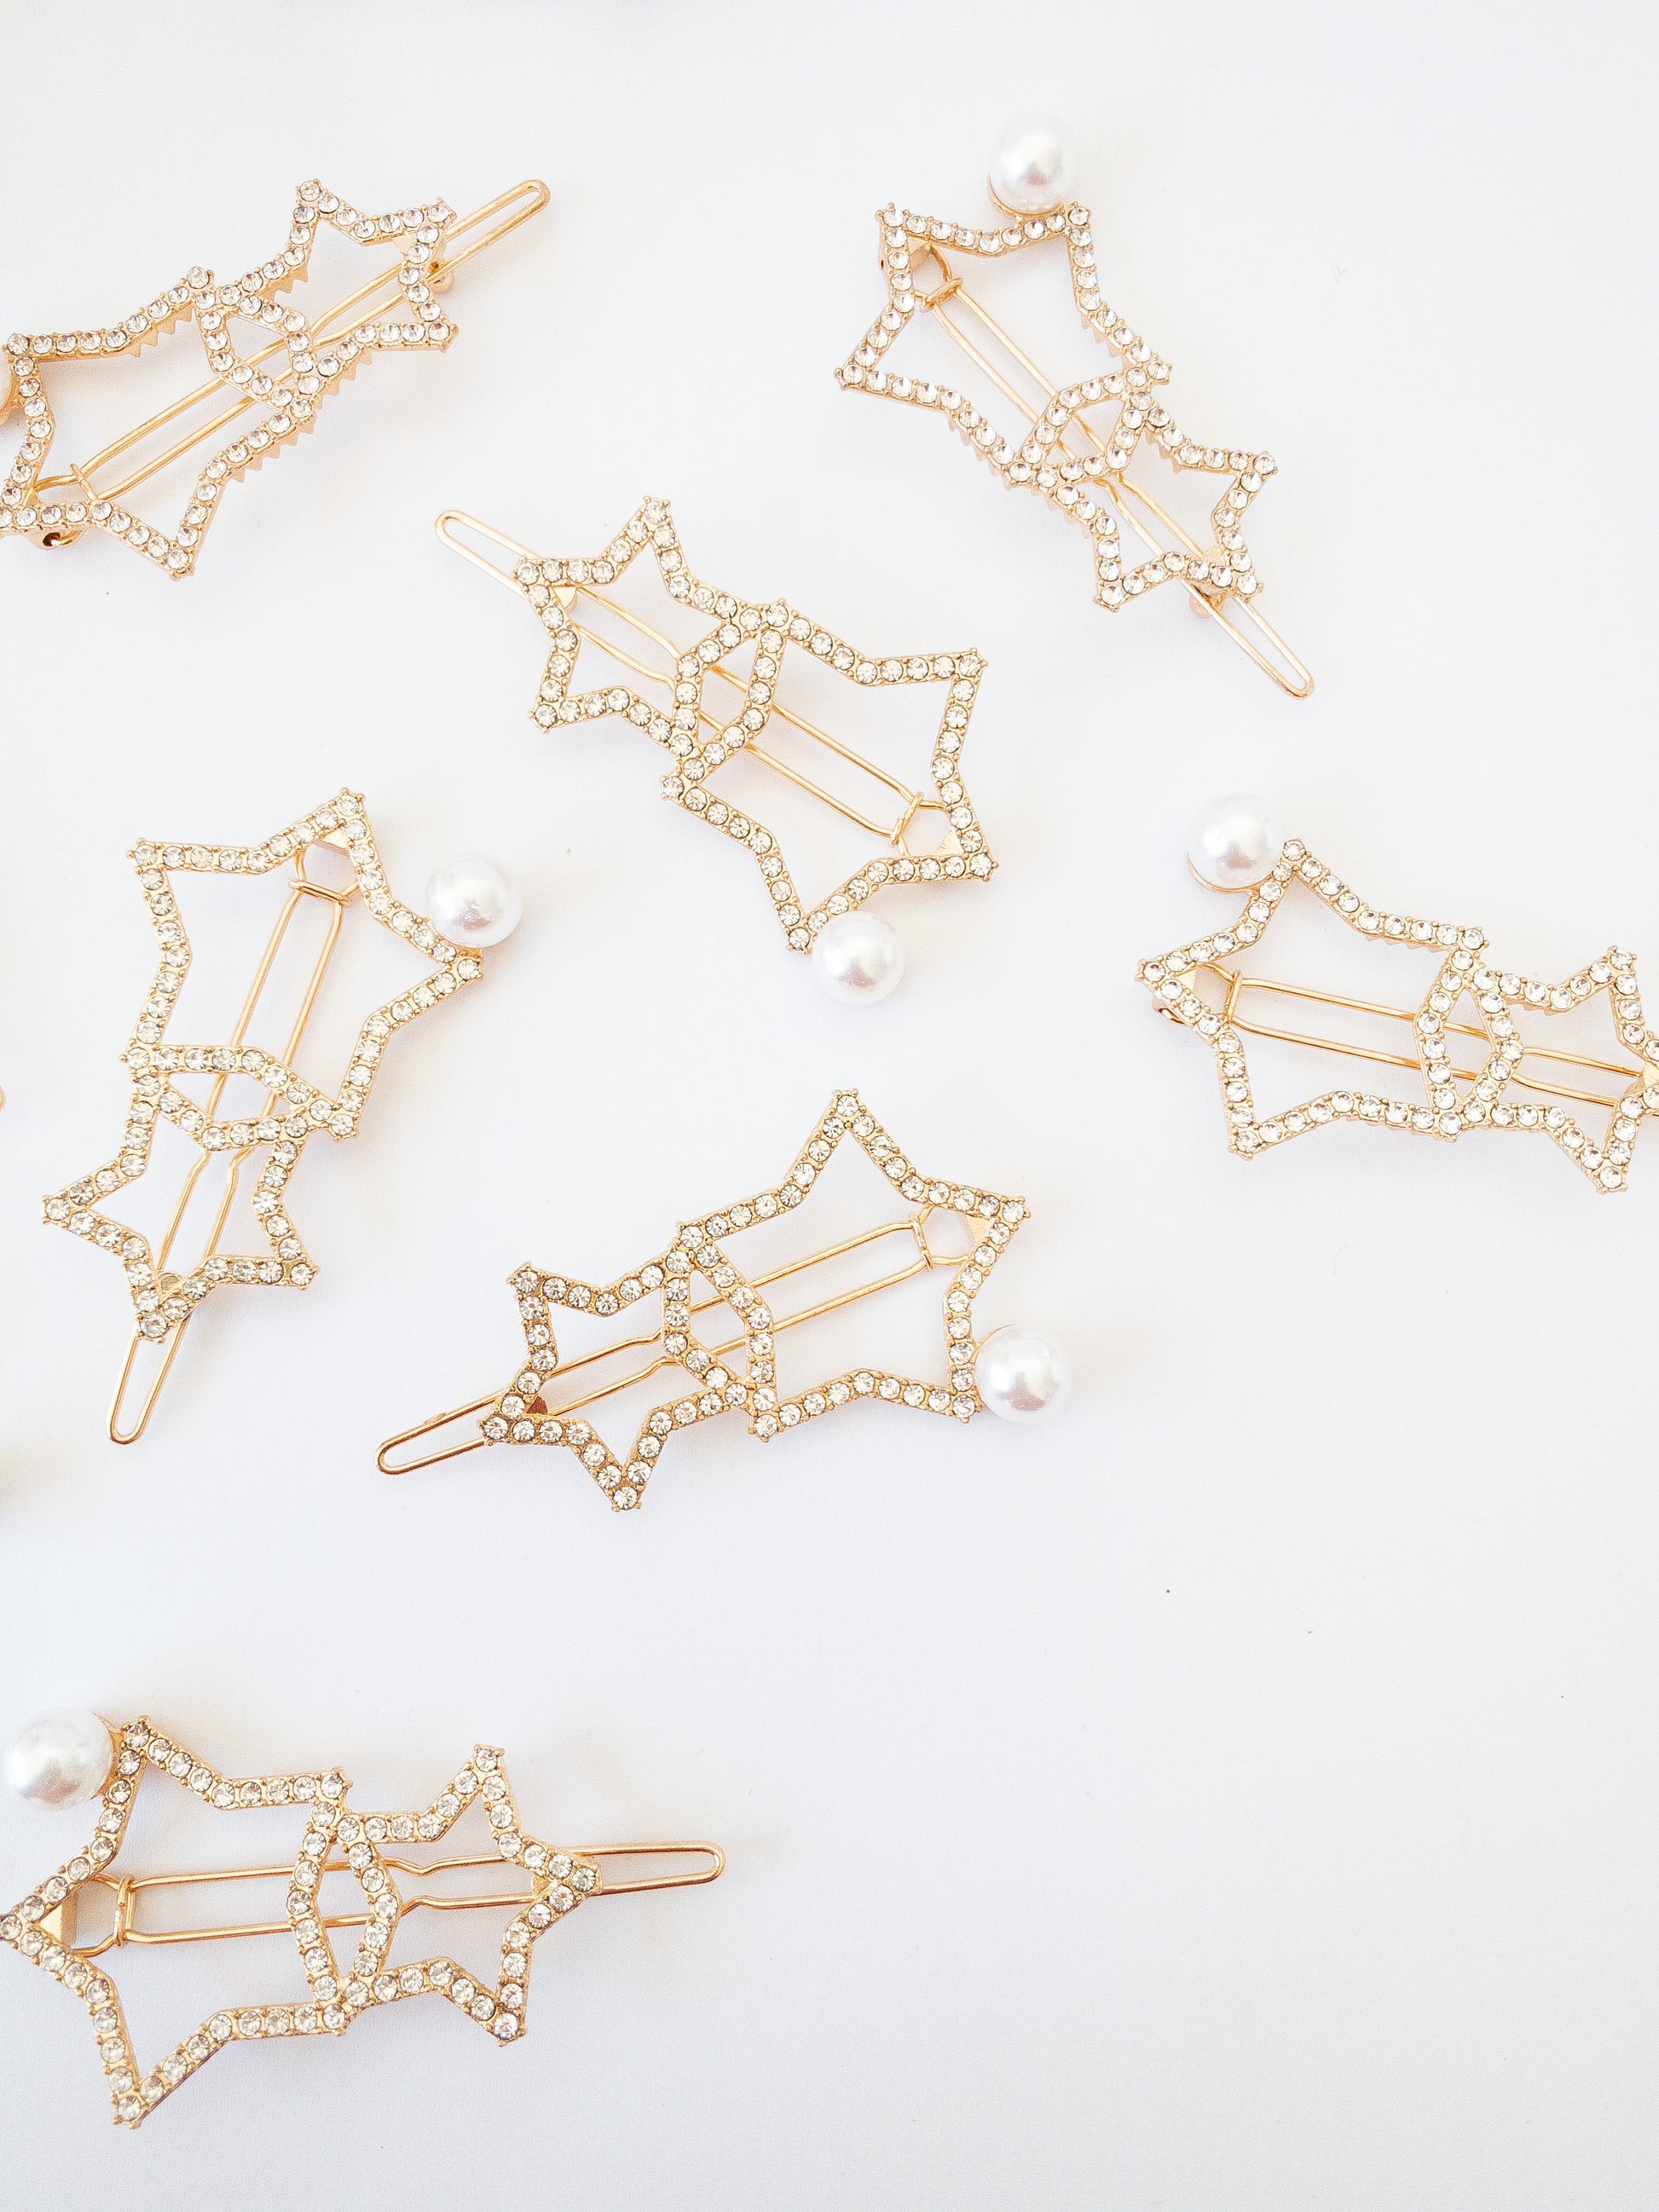 These gorgeous golden hair clips add a shiny, pretty touch to your hair! Each set comes with a duo of stars with a single pearl and a beautiful pearl-laden crescent moon. The hinge clip makes it great for holding back a side part or adding to an updo. 